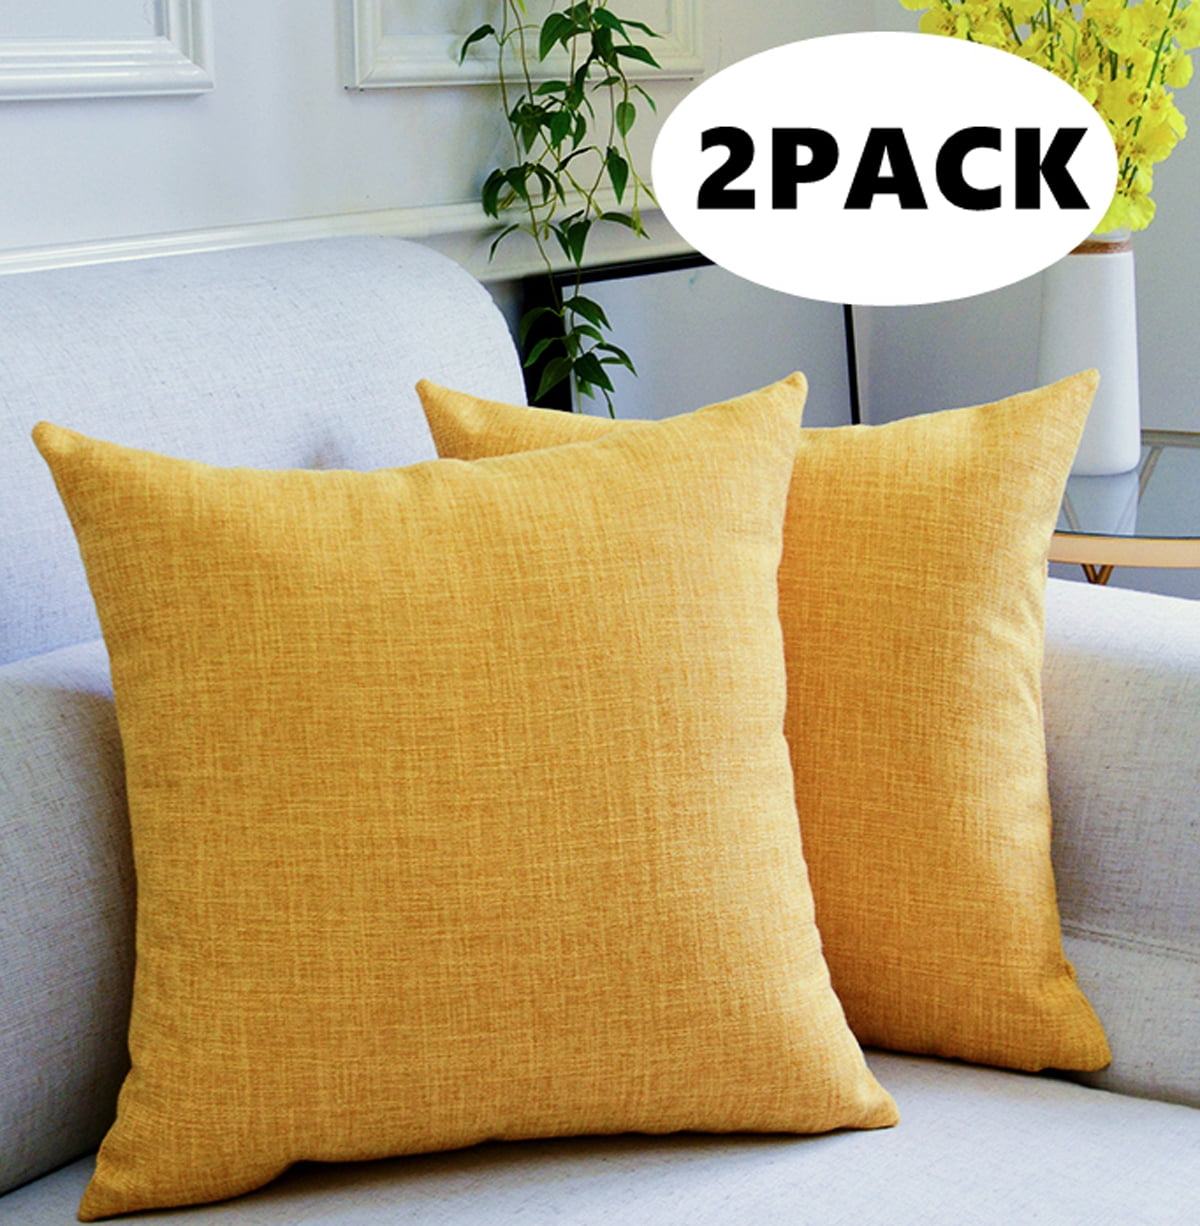 Anickal Set of 2 Mustard Yellow Pillow Covers Rustic Linen Decorative Square Throw Pillow Covers 18x18 inch for Sofa Couch Decoration